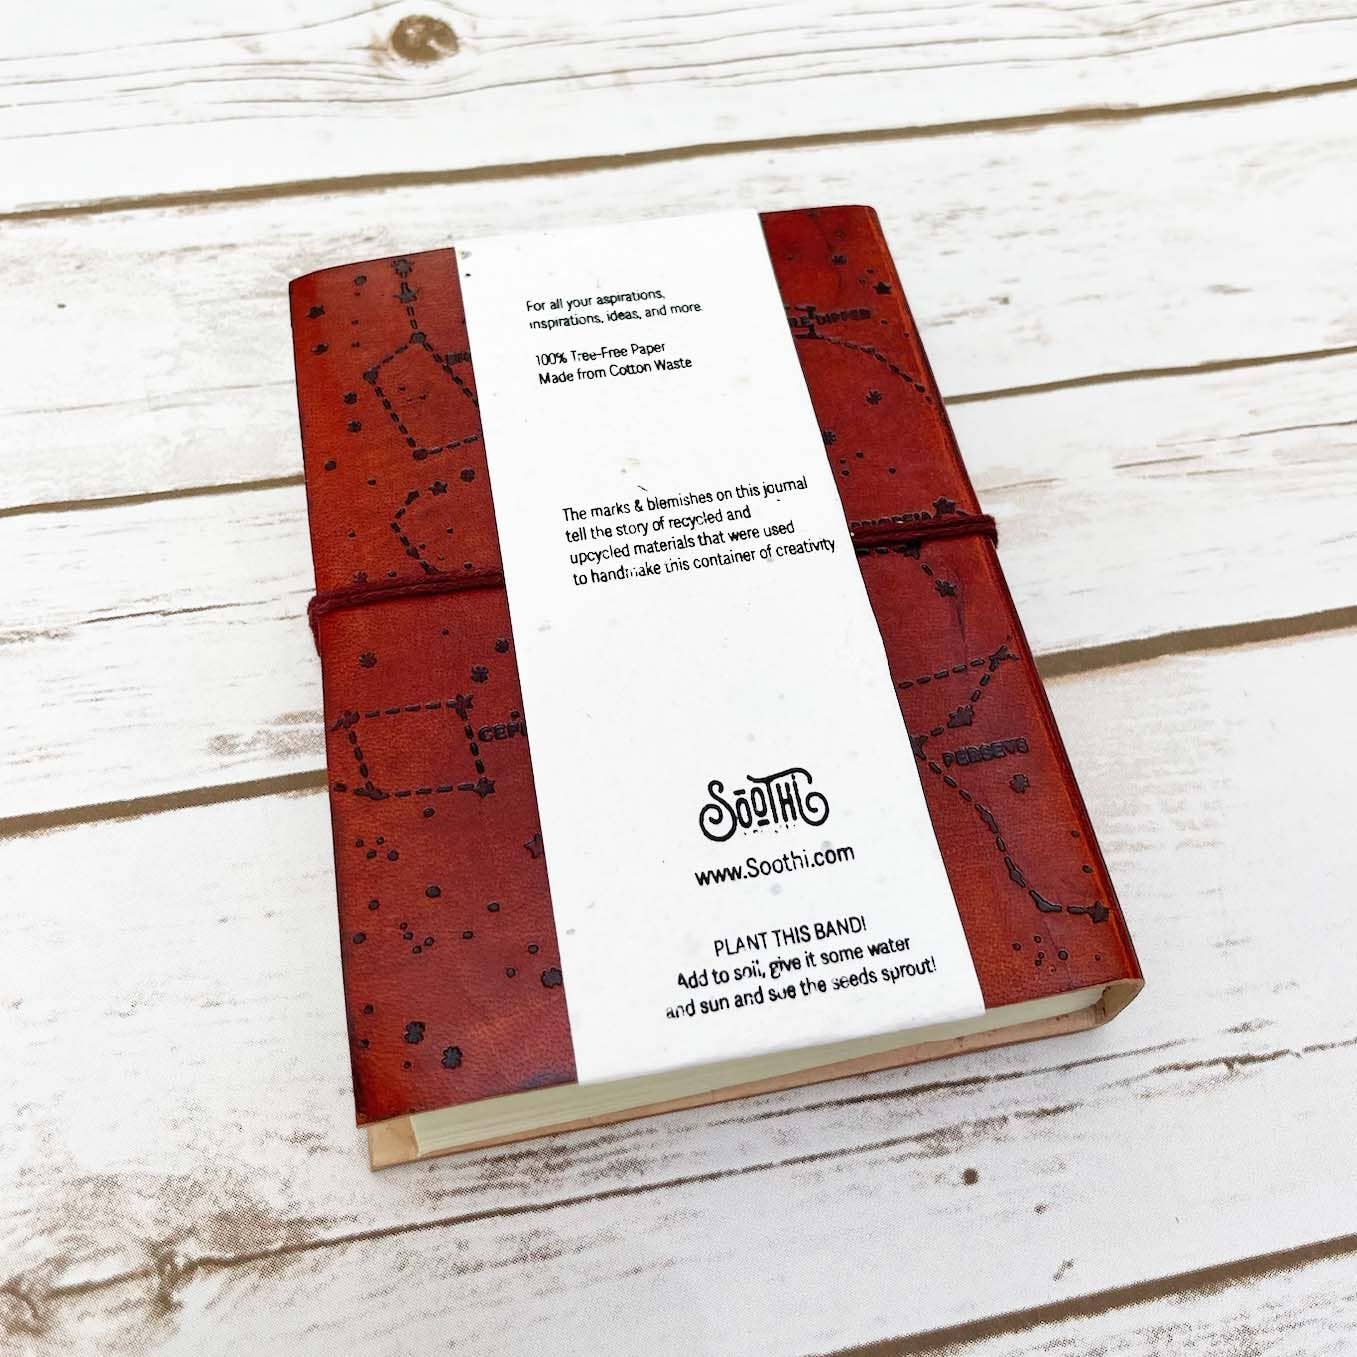 Important Nothings- Jane Austen Quote Leather Journal